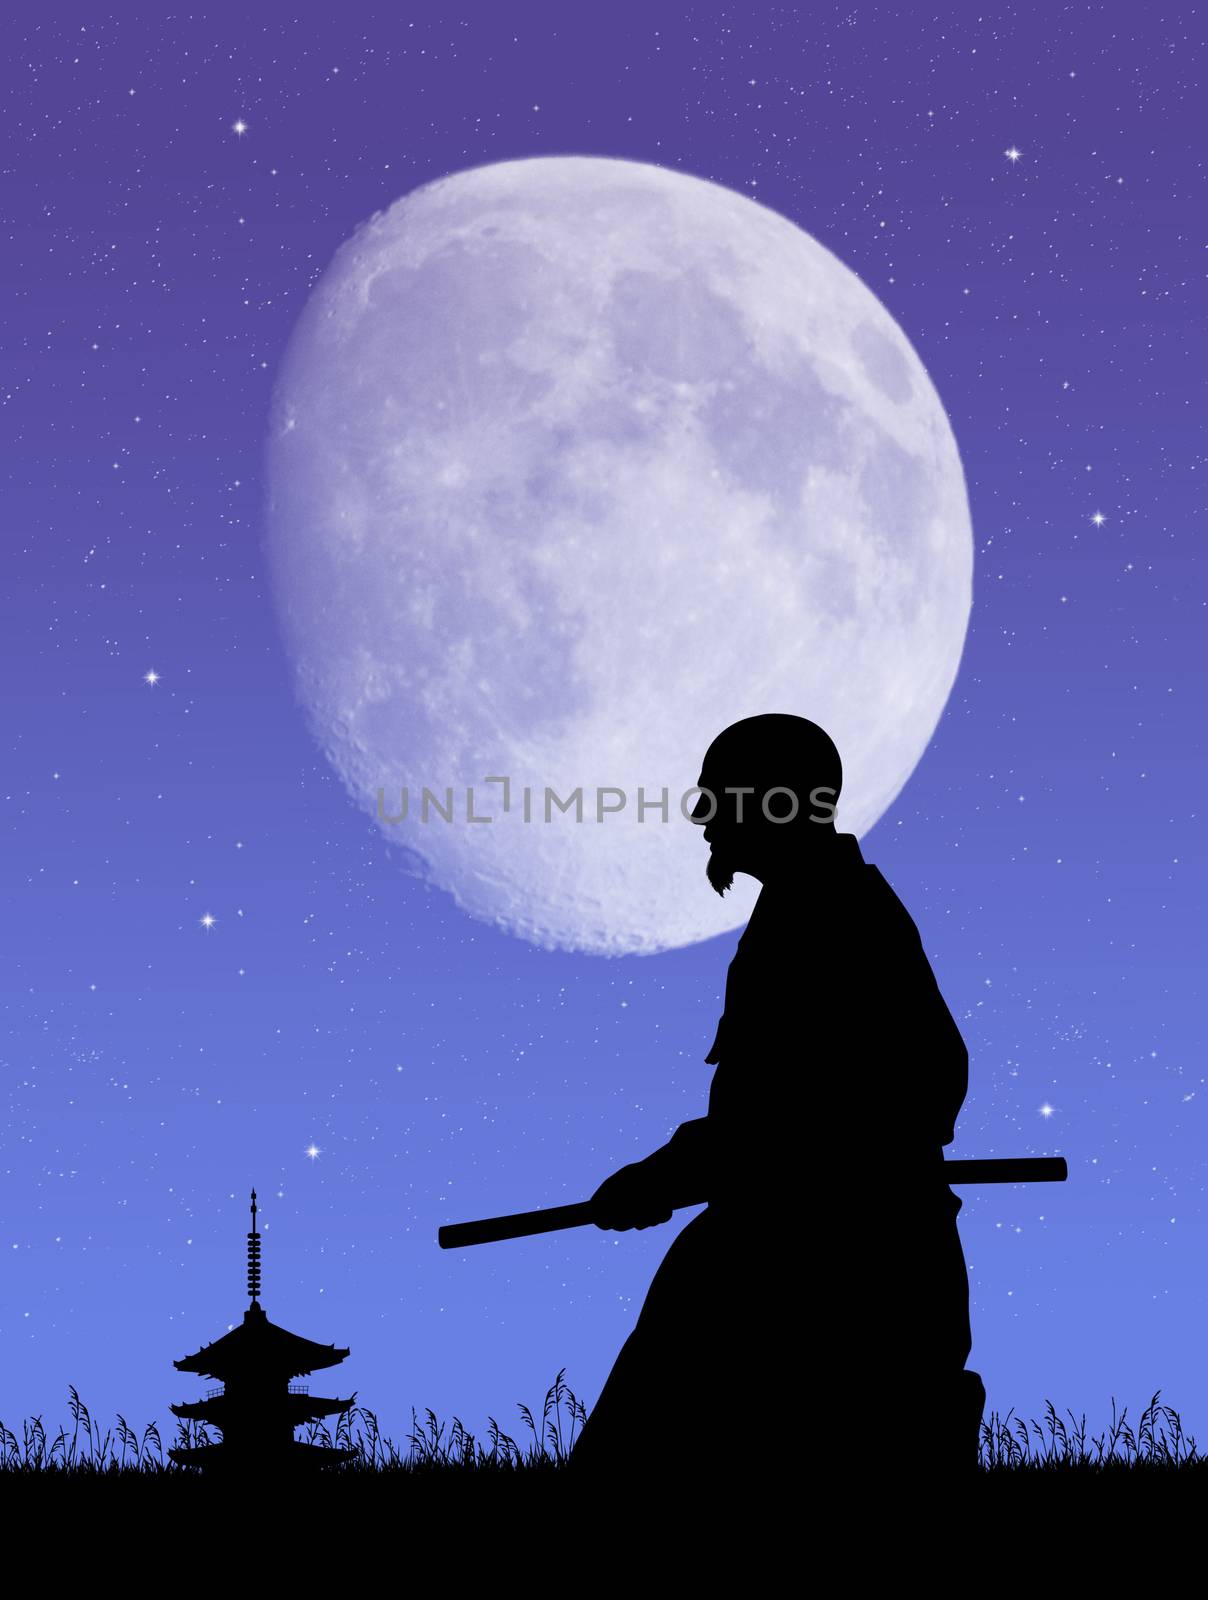 Aikido in the moonlight by adrenalina